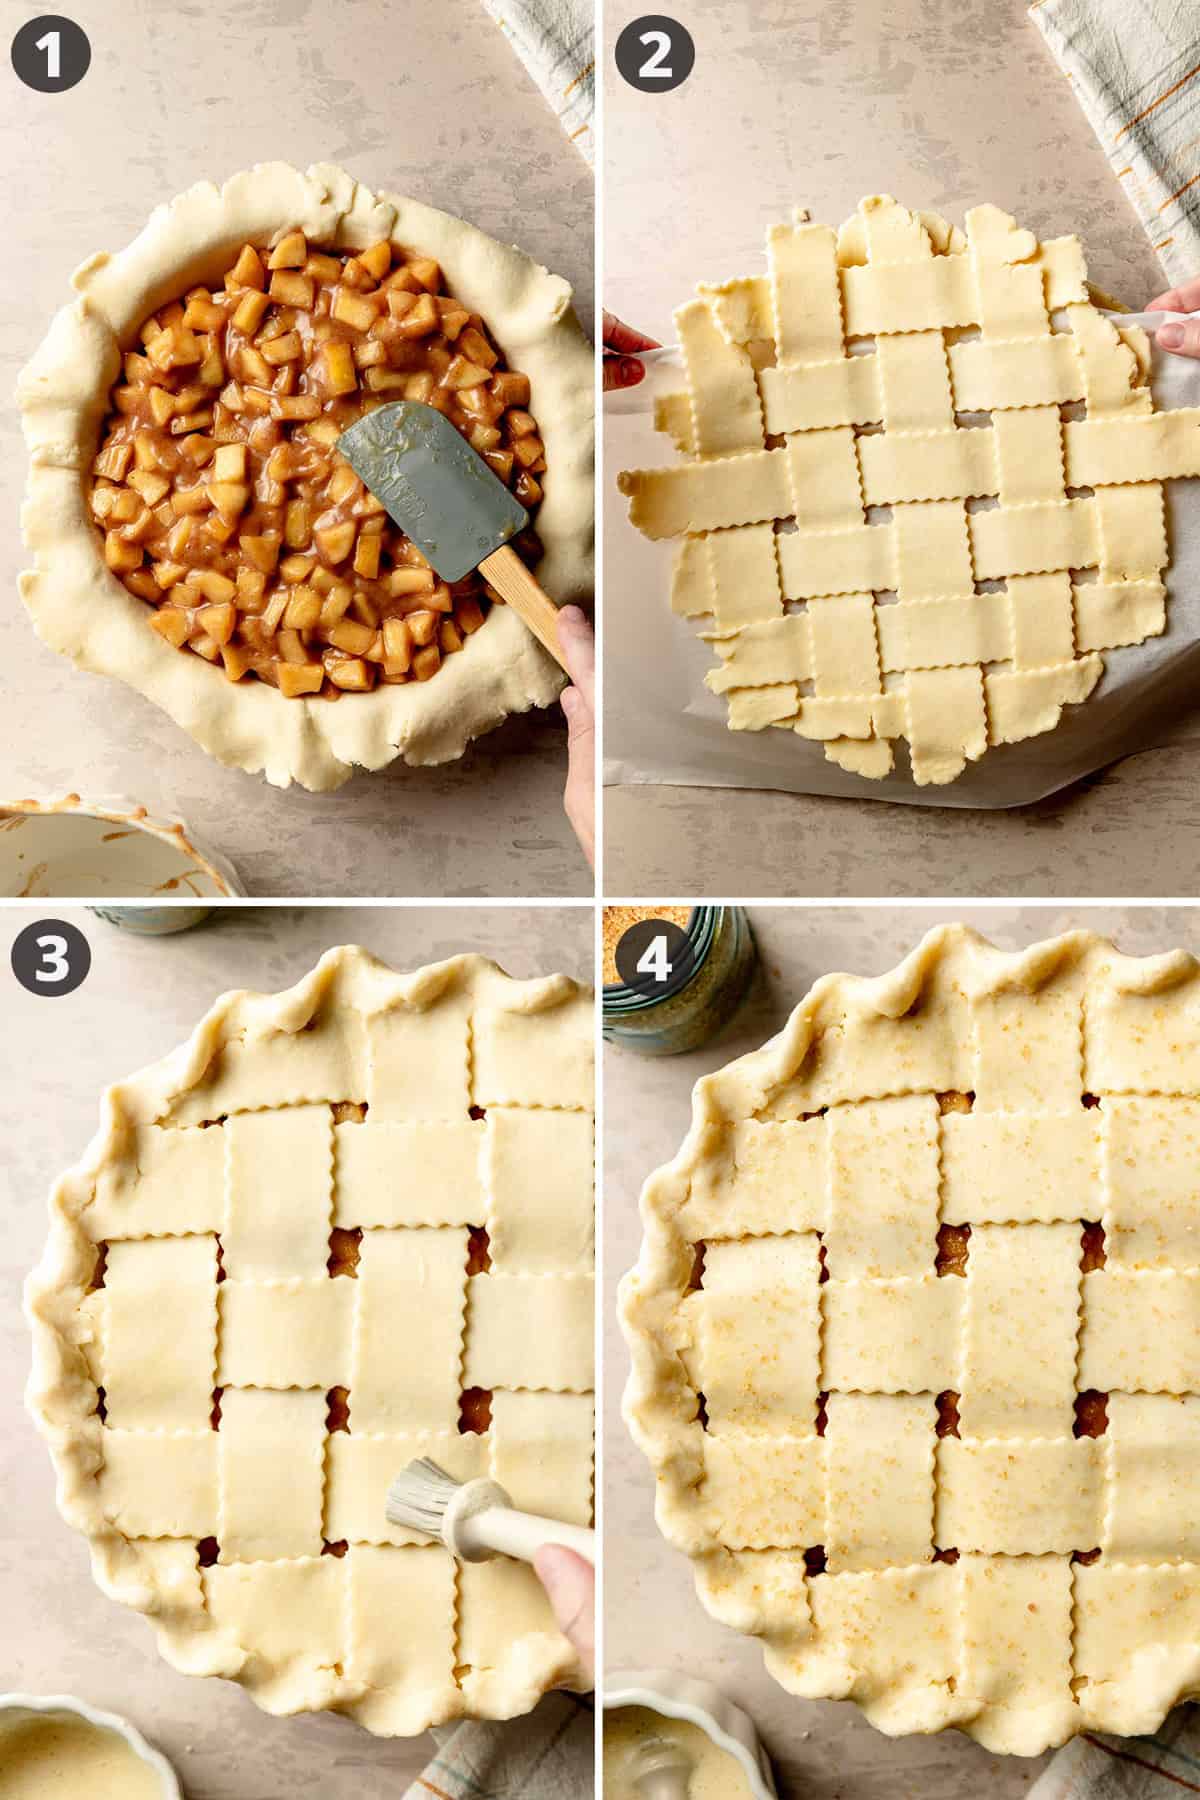 Pie crust in plate filled with apple pie filling and topped with lattice crust.